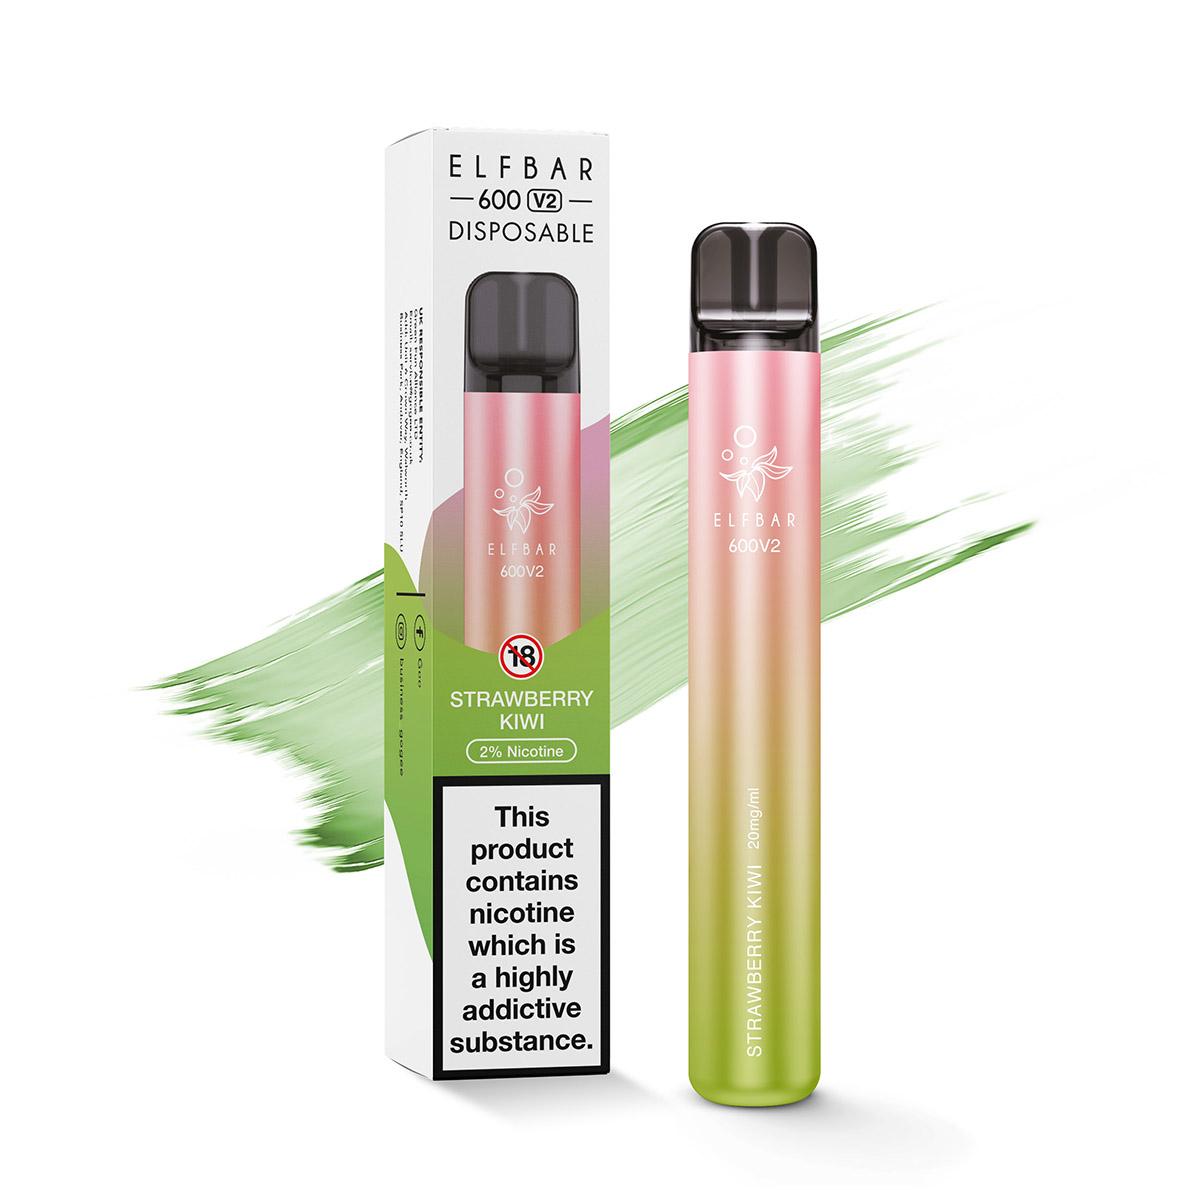 KIWI The Perfect Charger for Your E-cigarettes